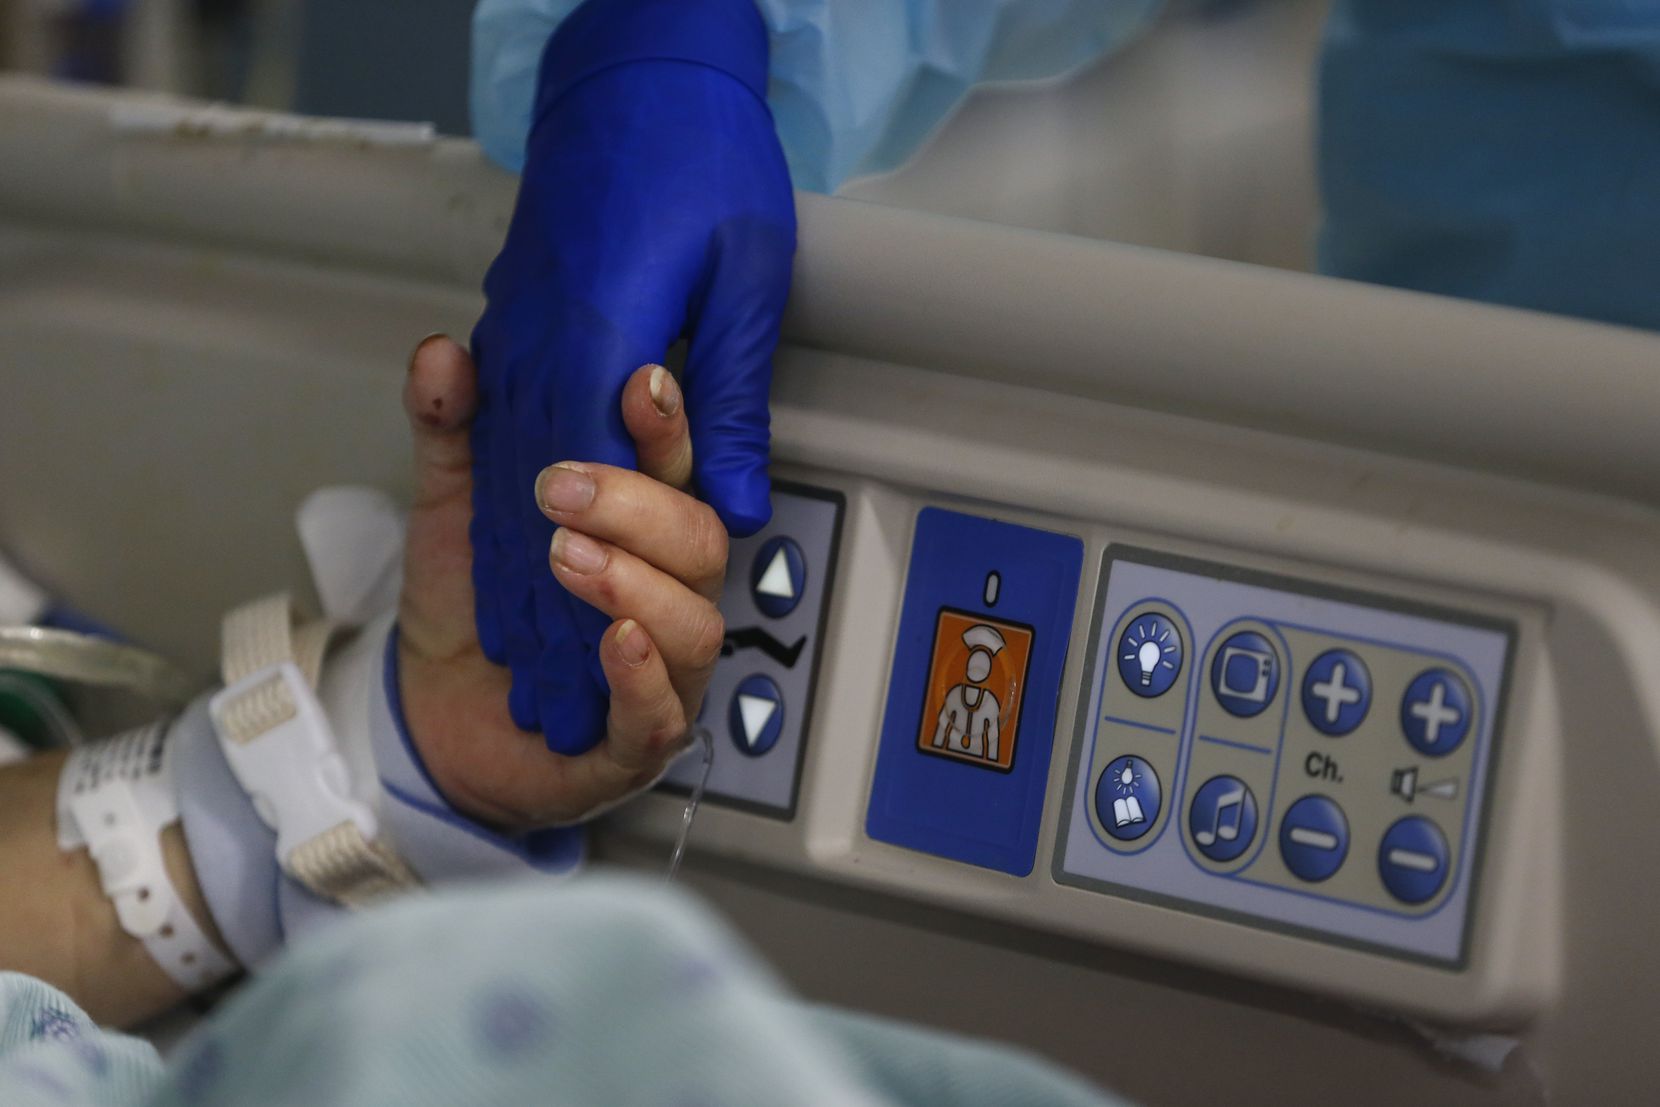 A 73-year-old intubated intensive care COVID-19 patient reached for the hand of a nurse as...